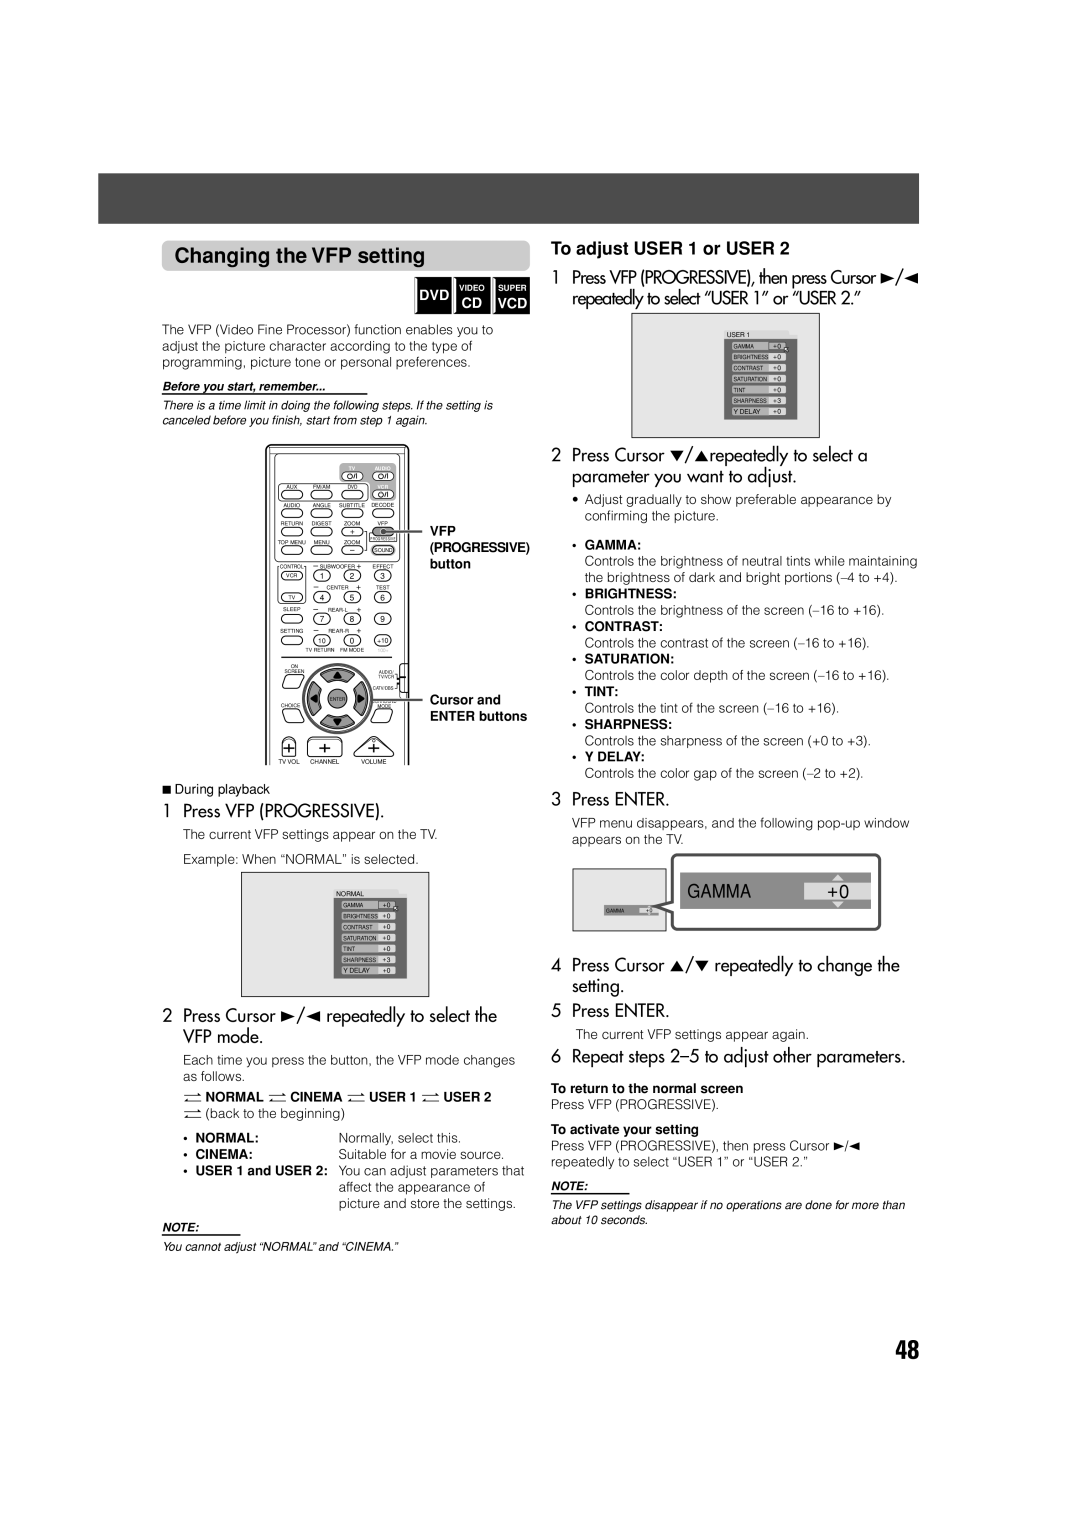 JVC SP-PWV70 Changing the VFP setting, Press VFP PROGRESSIVE, Press Cursor 3/2 repeatedly to select the VFP mode, GAMMA +0 